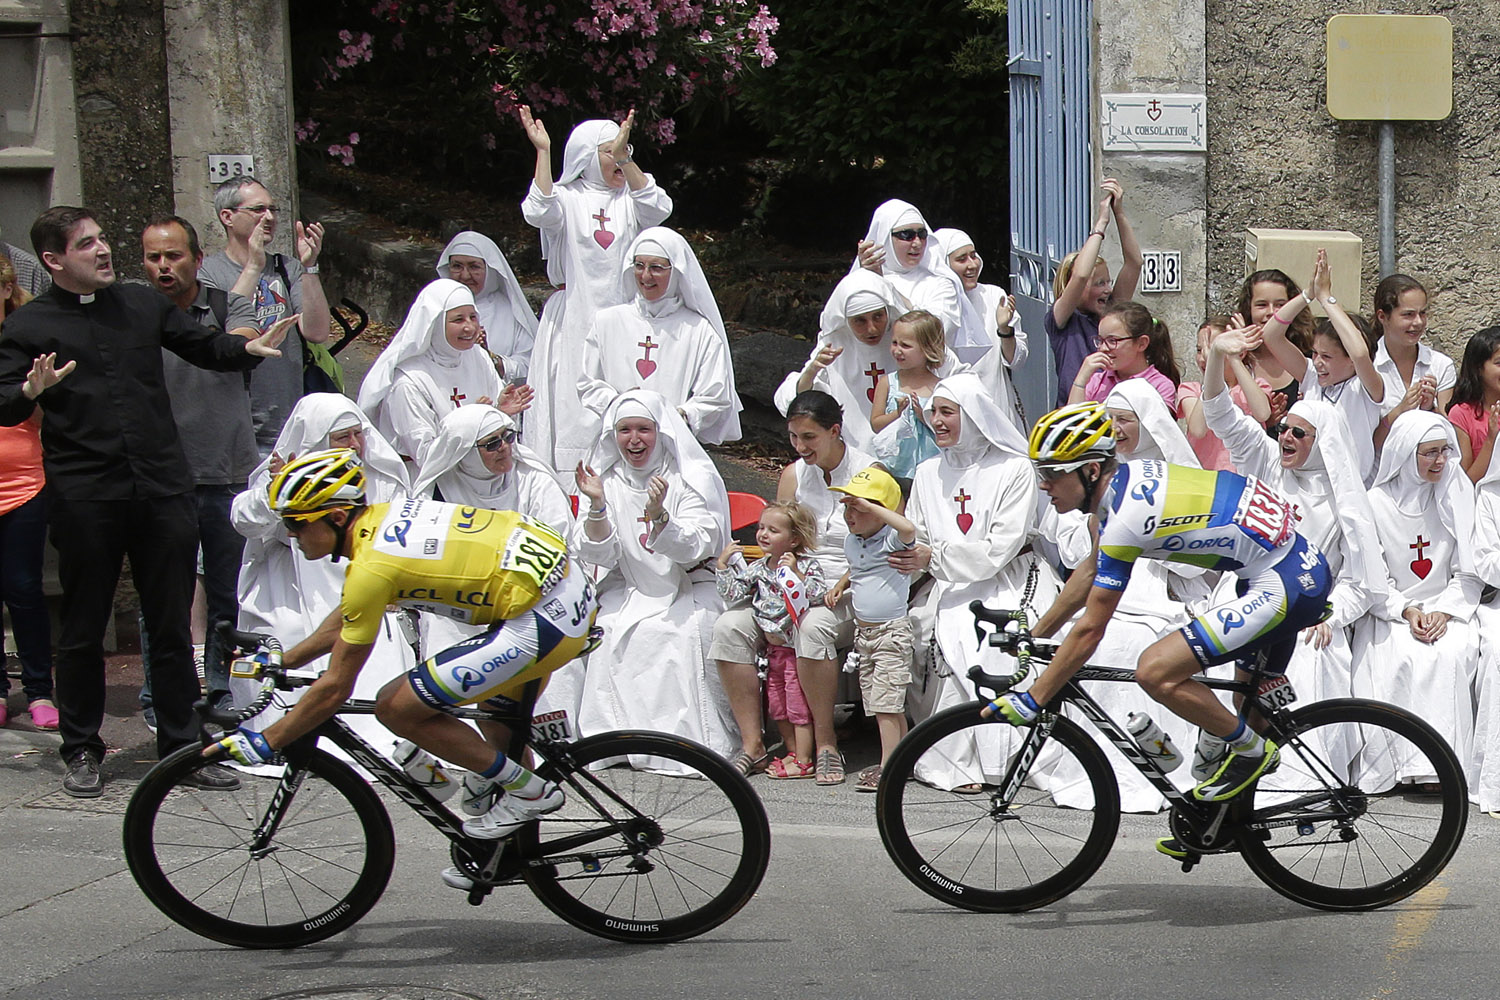 Race leader yellow jersey holder Orica Greenedge team rider Simon Gerrans of Australia cycles past Sisters of the Consolation congregation during the 228.5 km fifth stage of the centenary Tour de France cycling race from Cagnes-Sur-Mer to Marseille